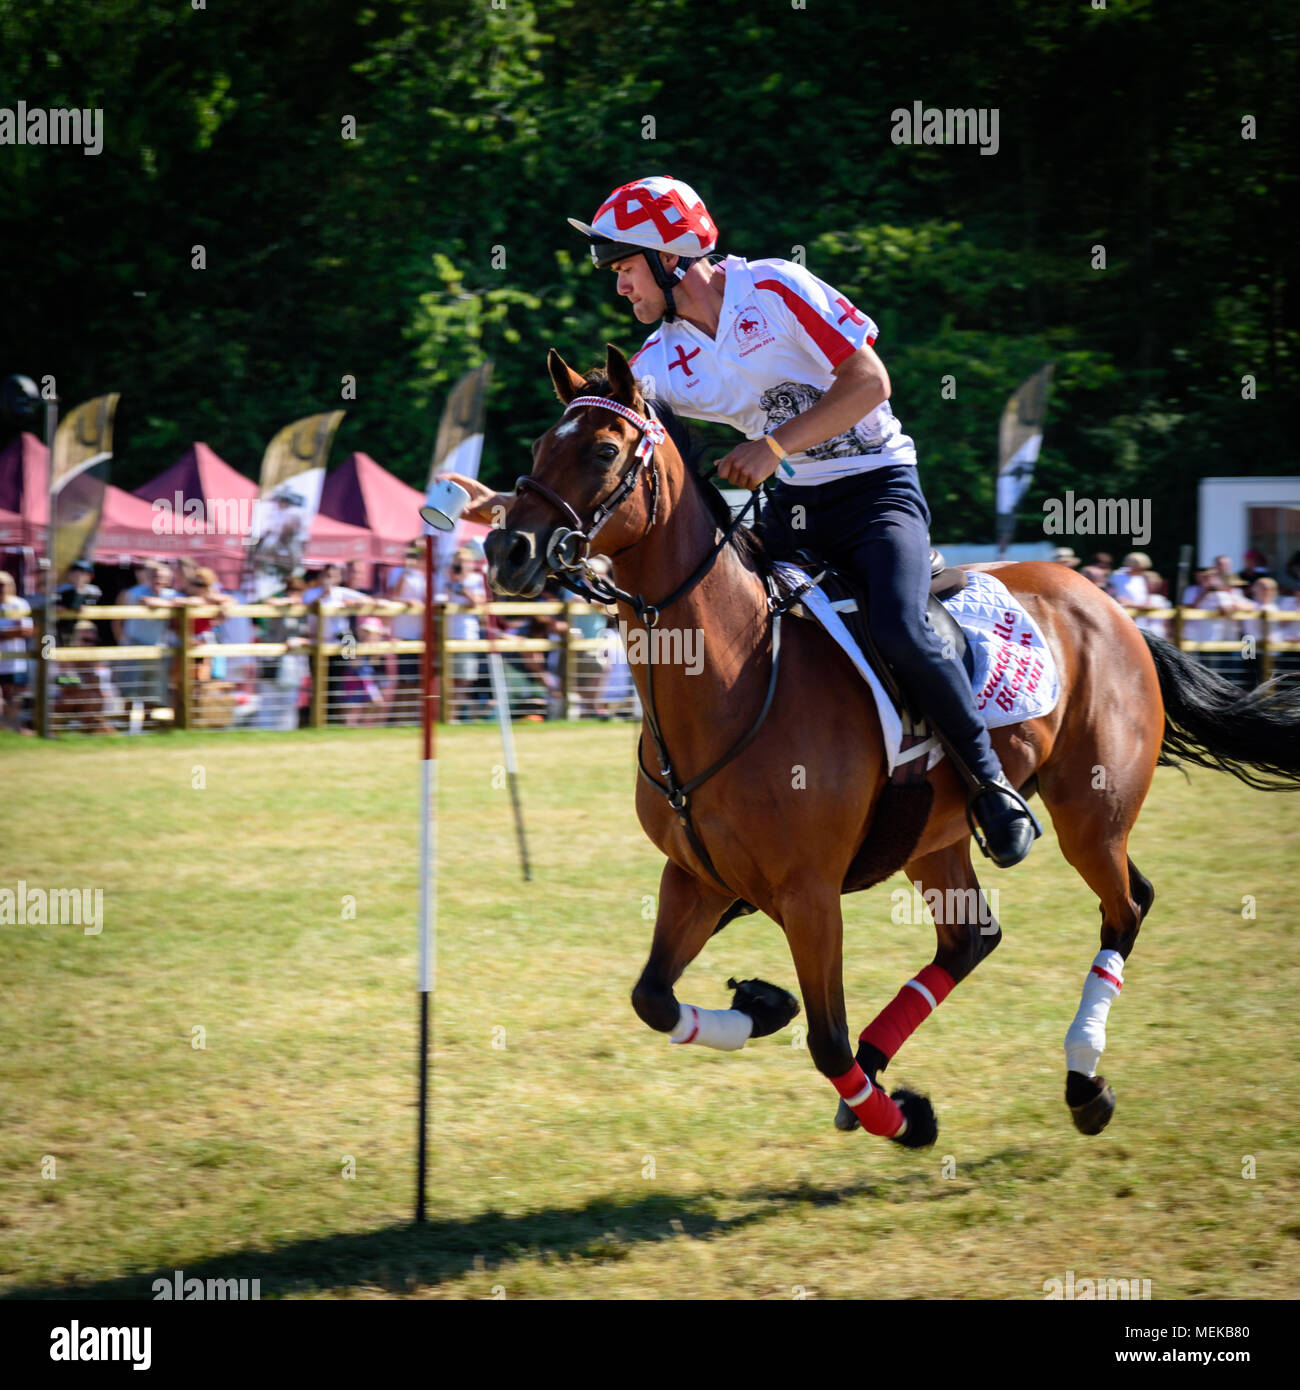 A rider competing in the Mounted Games places a tin cup on a pole while at full gallop Stock Photo